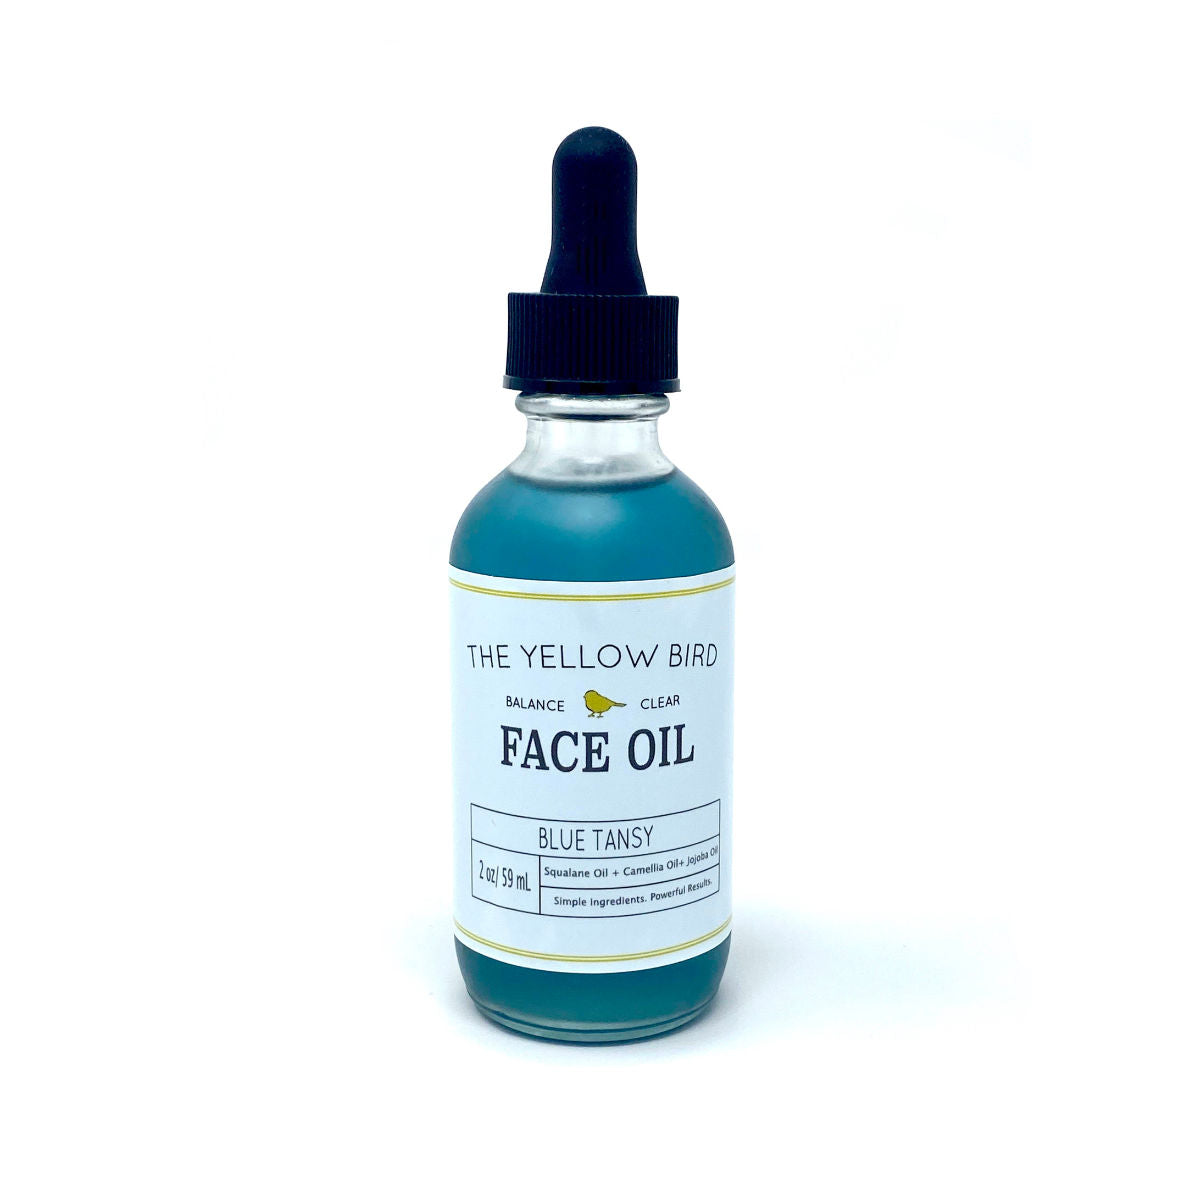 The Yellow Bird Blue Tansy Face Oil